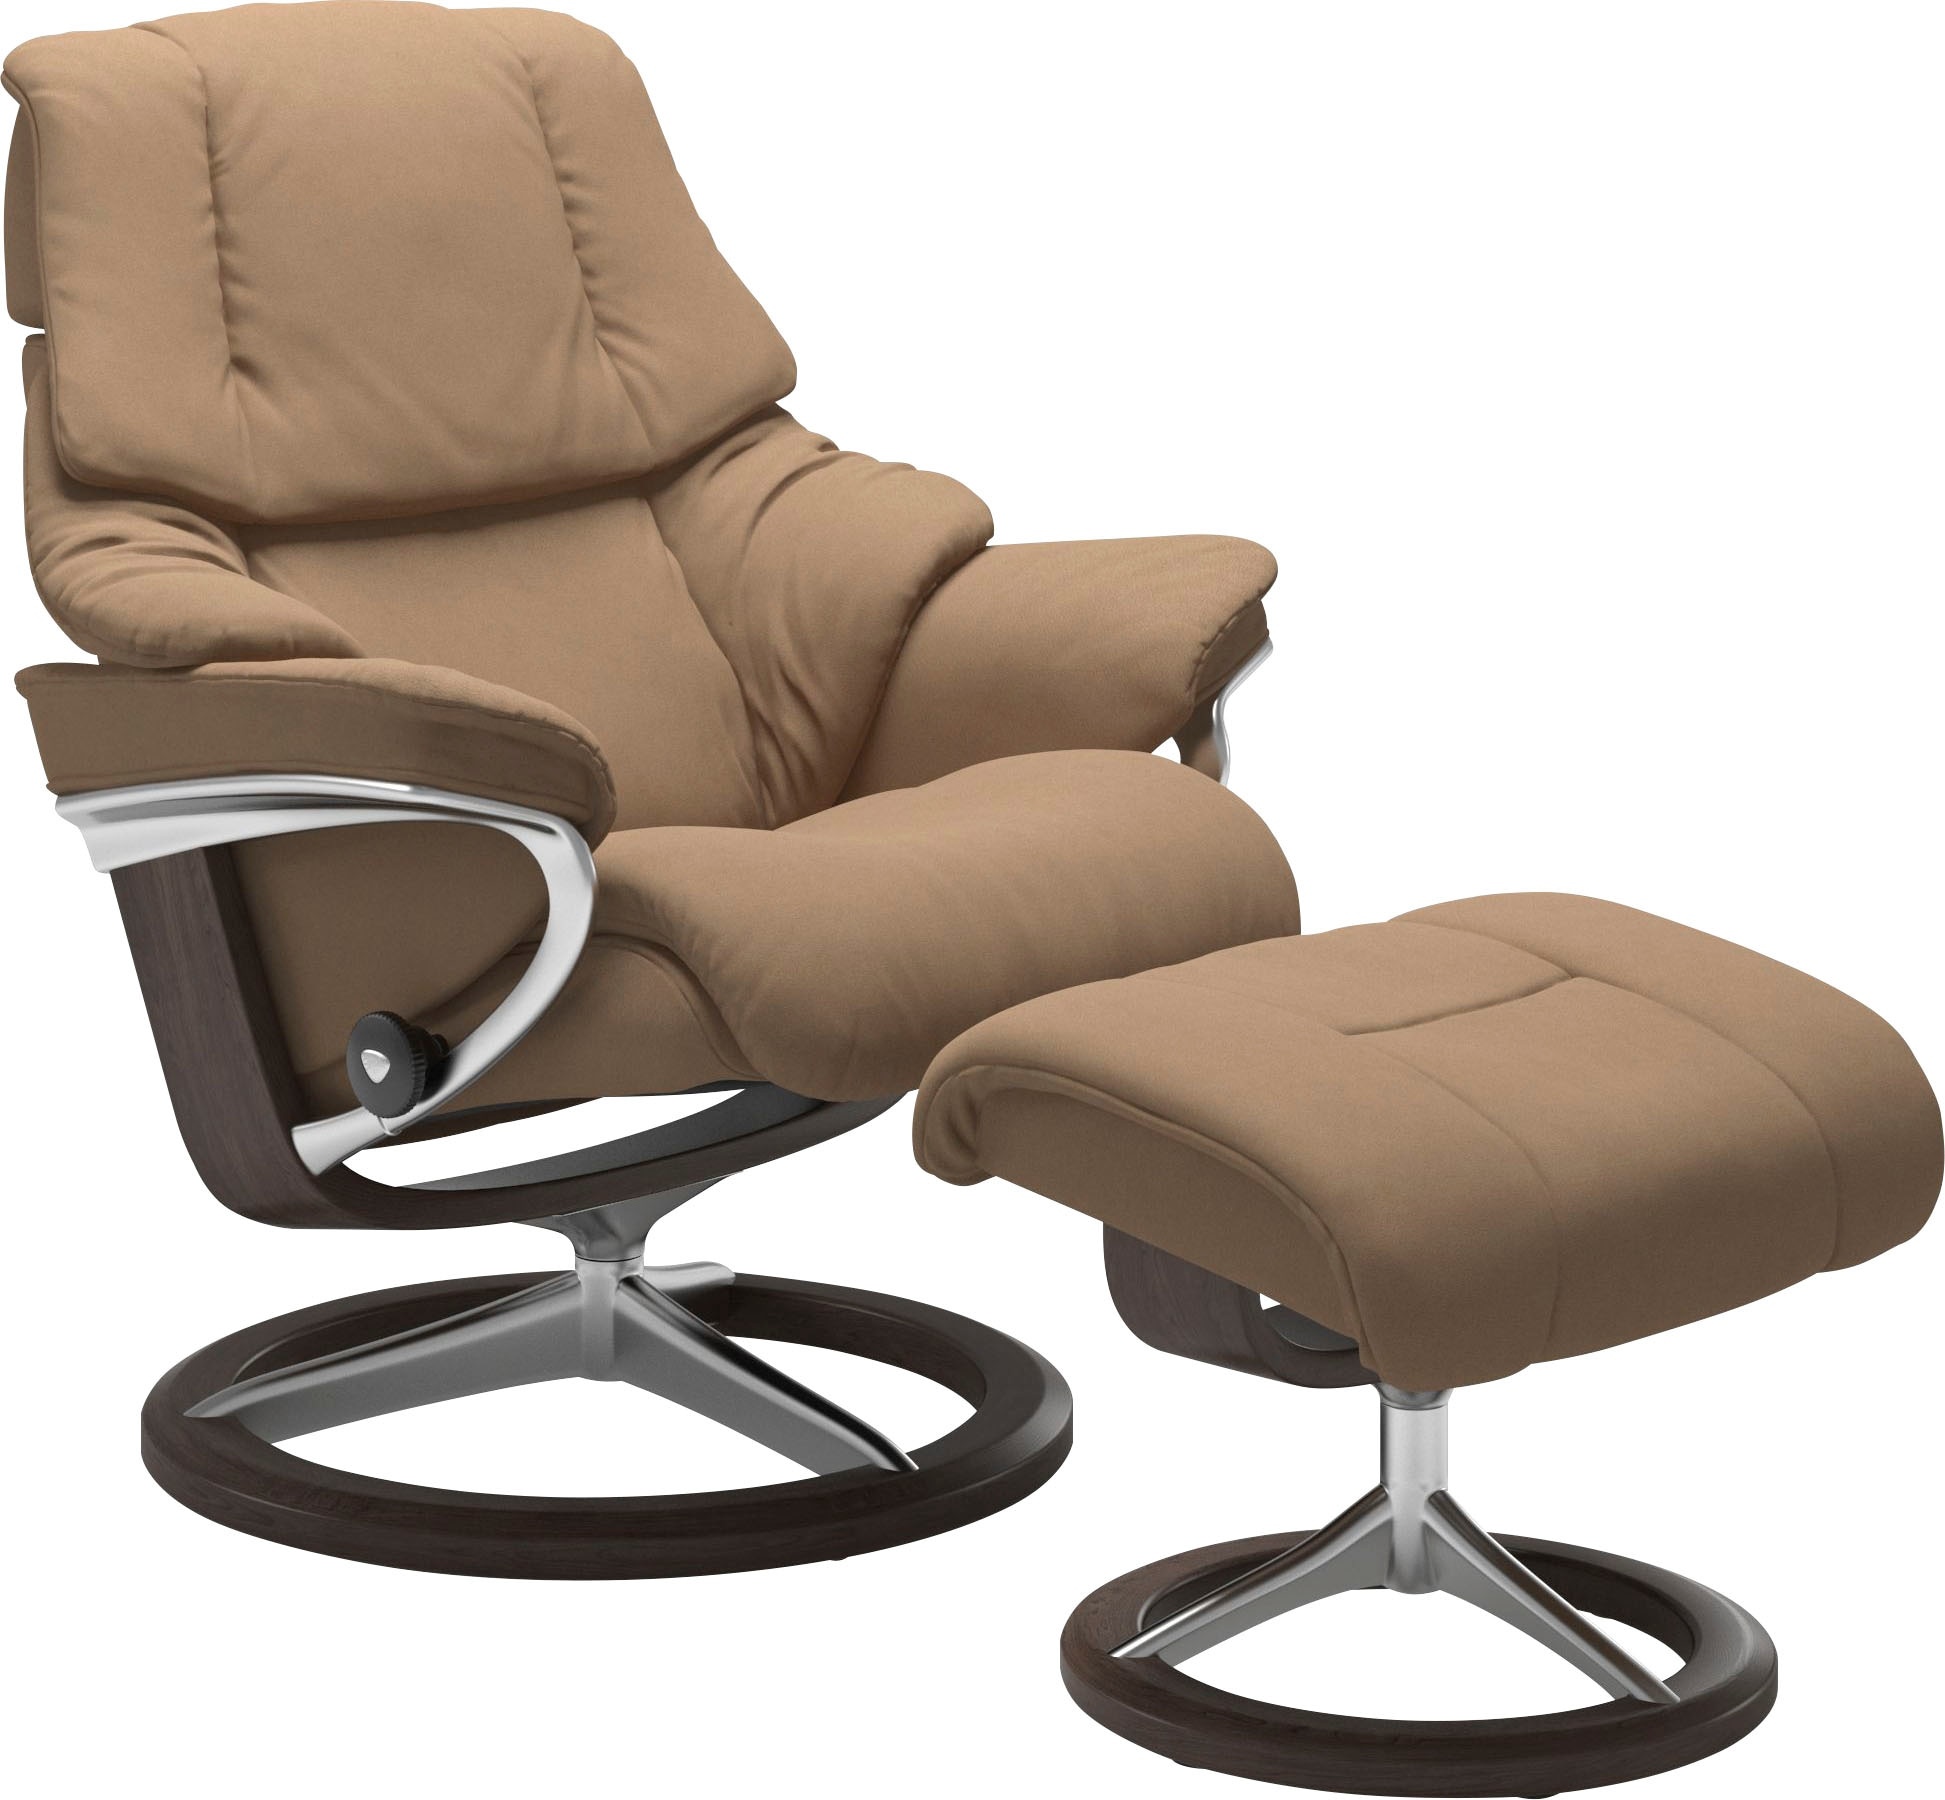 Relaxsessel STRESSLESS "Reno" Sessel Gr. Microfaser DINAMICA, Signature Base Wenge, Relaxfunktion-Drehfunktion-PlusTMSystem-Gleitsystem-BalanceAdaptTM, B/H/T: 83 cm x 100 cm x 76 cm, braun (sand dinamica) Lesesessel und Relaxsessel